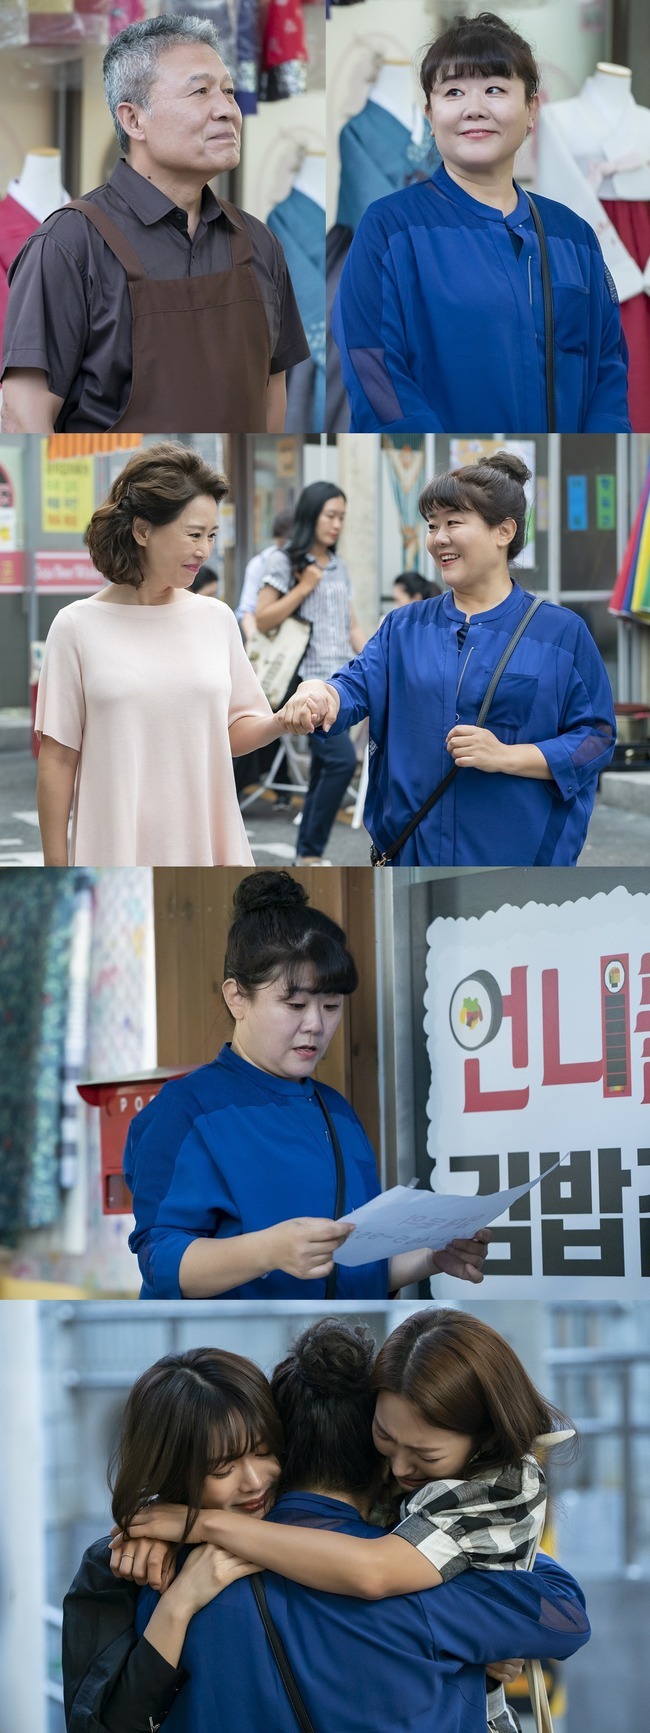 Lee Jung Eun, who reunited with Cheon Ho-Jin, will re-enter the Yongju market.In the 77th and 78th episodes of KBS 2TV weekend drama Ive Goed Once (playplayed by Yang Hee-seung, An-Am/Director Lee Jae-sang), which will be broadcast on August 8, Lee Jung Eun (played by Kang Cho-yeon/Song Young-sook) will be drawn.In the last broadcast, Song Young-dal (Cheon Ho-Jin) and Kang Cho-yeon (Lee Jung Eun) who visited each other in more than 40 years after a long time were portrayed.Kang Cho-yeon continued to apologize to Song Young-dal, saying, I was late, but my brother kept my promise. I promised to come pick me up.After a long time, the two men, who had a dramatic reunion, made their viewers feel even more beautiful. The scene was the highest audience rating of 37% per minute due to the explosive reaction of viewers.In this weeks broadcast, Song Young-dal, Jang Ok-bun (Cha Hwa-yeon), and Kang Cho-yeon, who travel around the market, will be revealed after a hearty reunion with their siblings.The smile of those who have a good time holding their hands is conveying the heartbreaking happiness.In the meantime, Kang Cho-yeons expression of staring at the paper of the rental door while stopping in front of her sisters Kimbap house crosses the unknown feelings and adds to the food.Moreover, Lee Ju-ri (Kim So-ra) and Kim Ga-yeon (Son Da-eun), who announced their farewell, are holding Kang Cho-yeon tightly, adding to the deep echo.minjee Lee